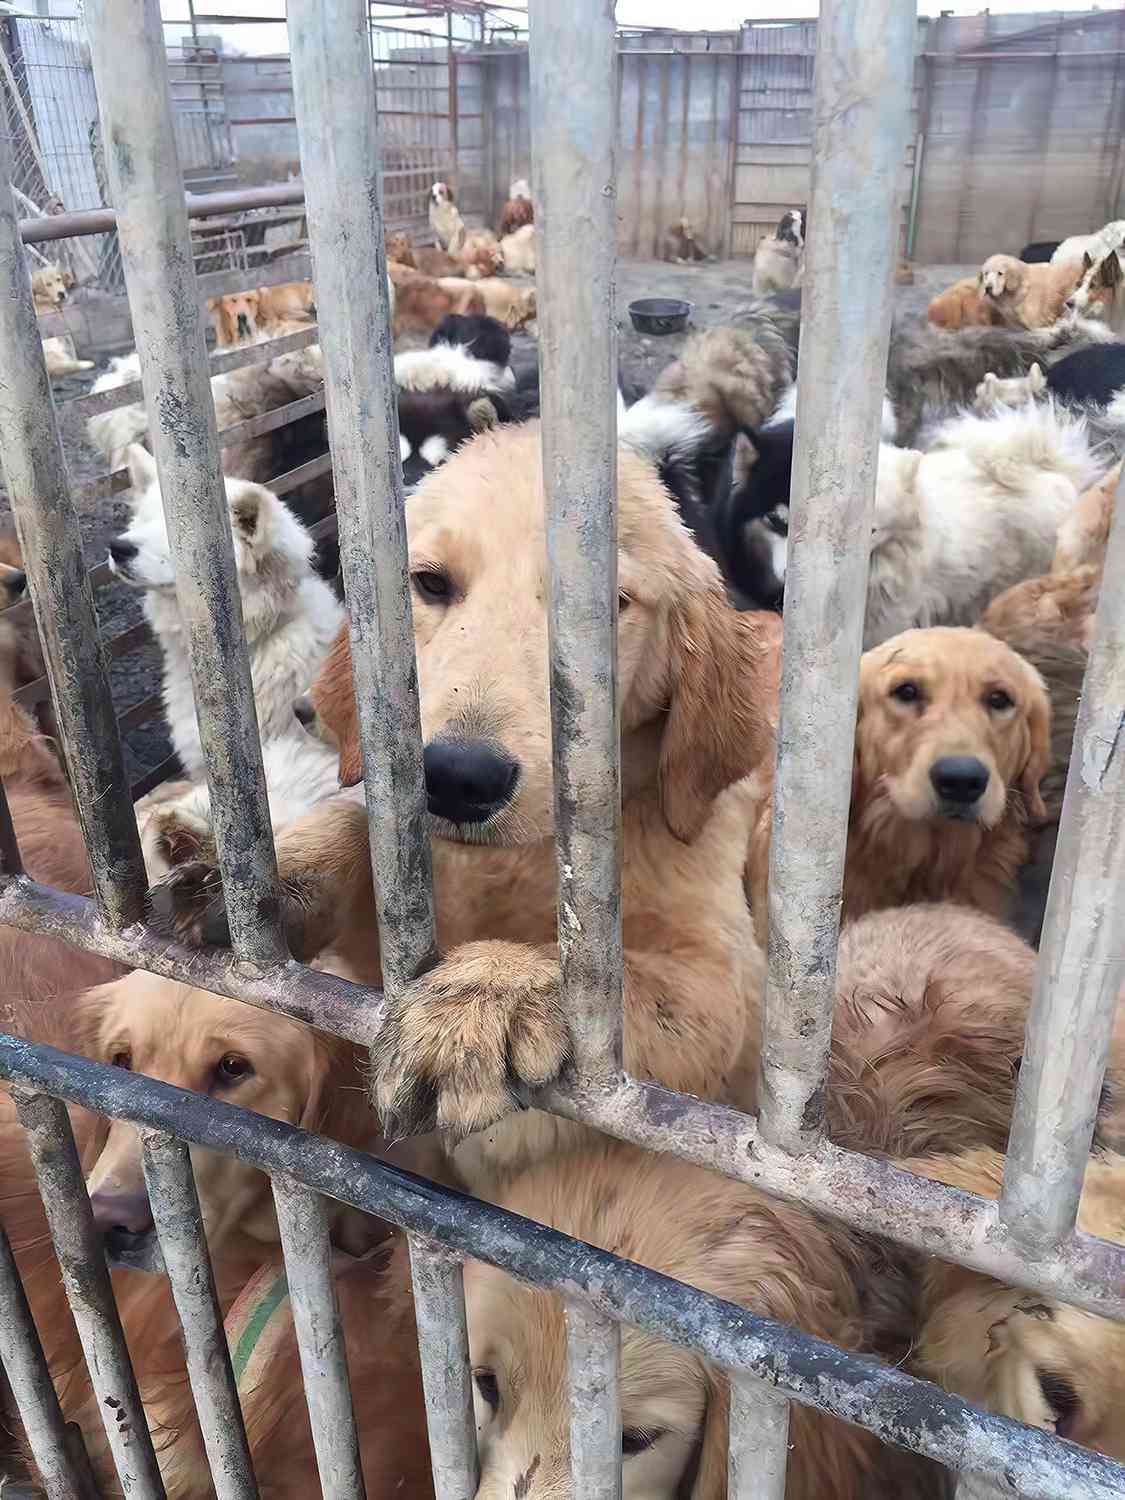 60 Dogs Rescued From China S Dog Meat Trade Need Your Help To Find Loving Forever Homes People Com